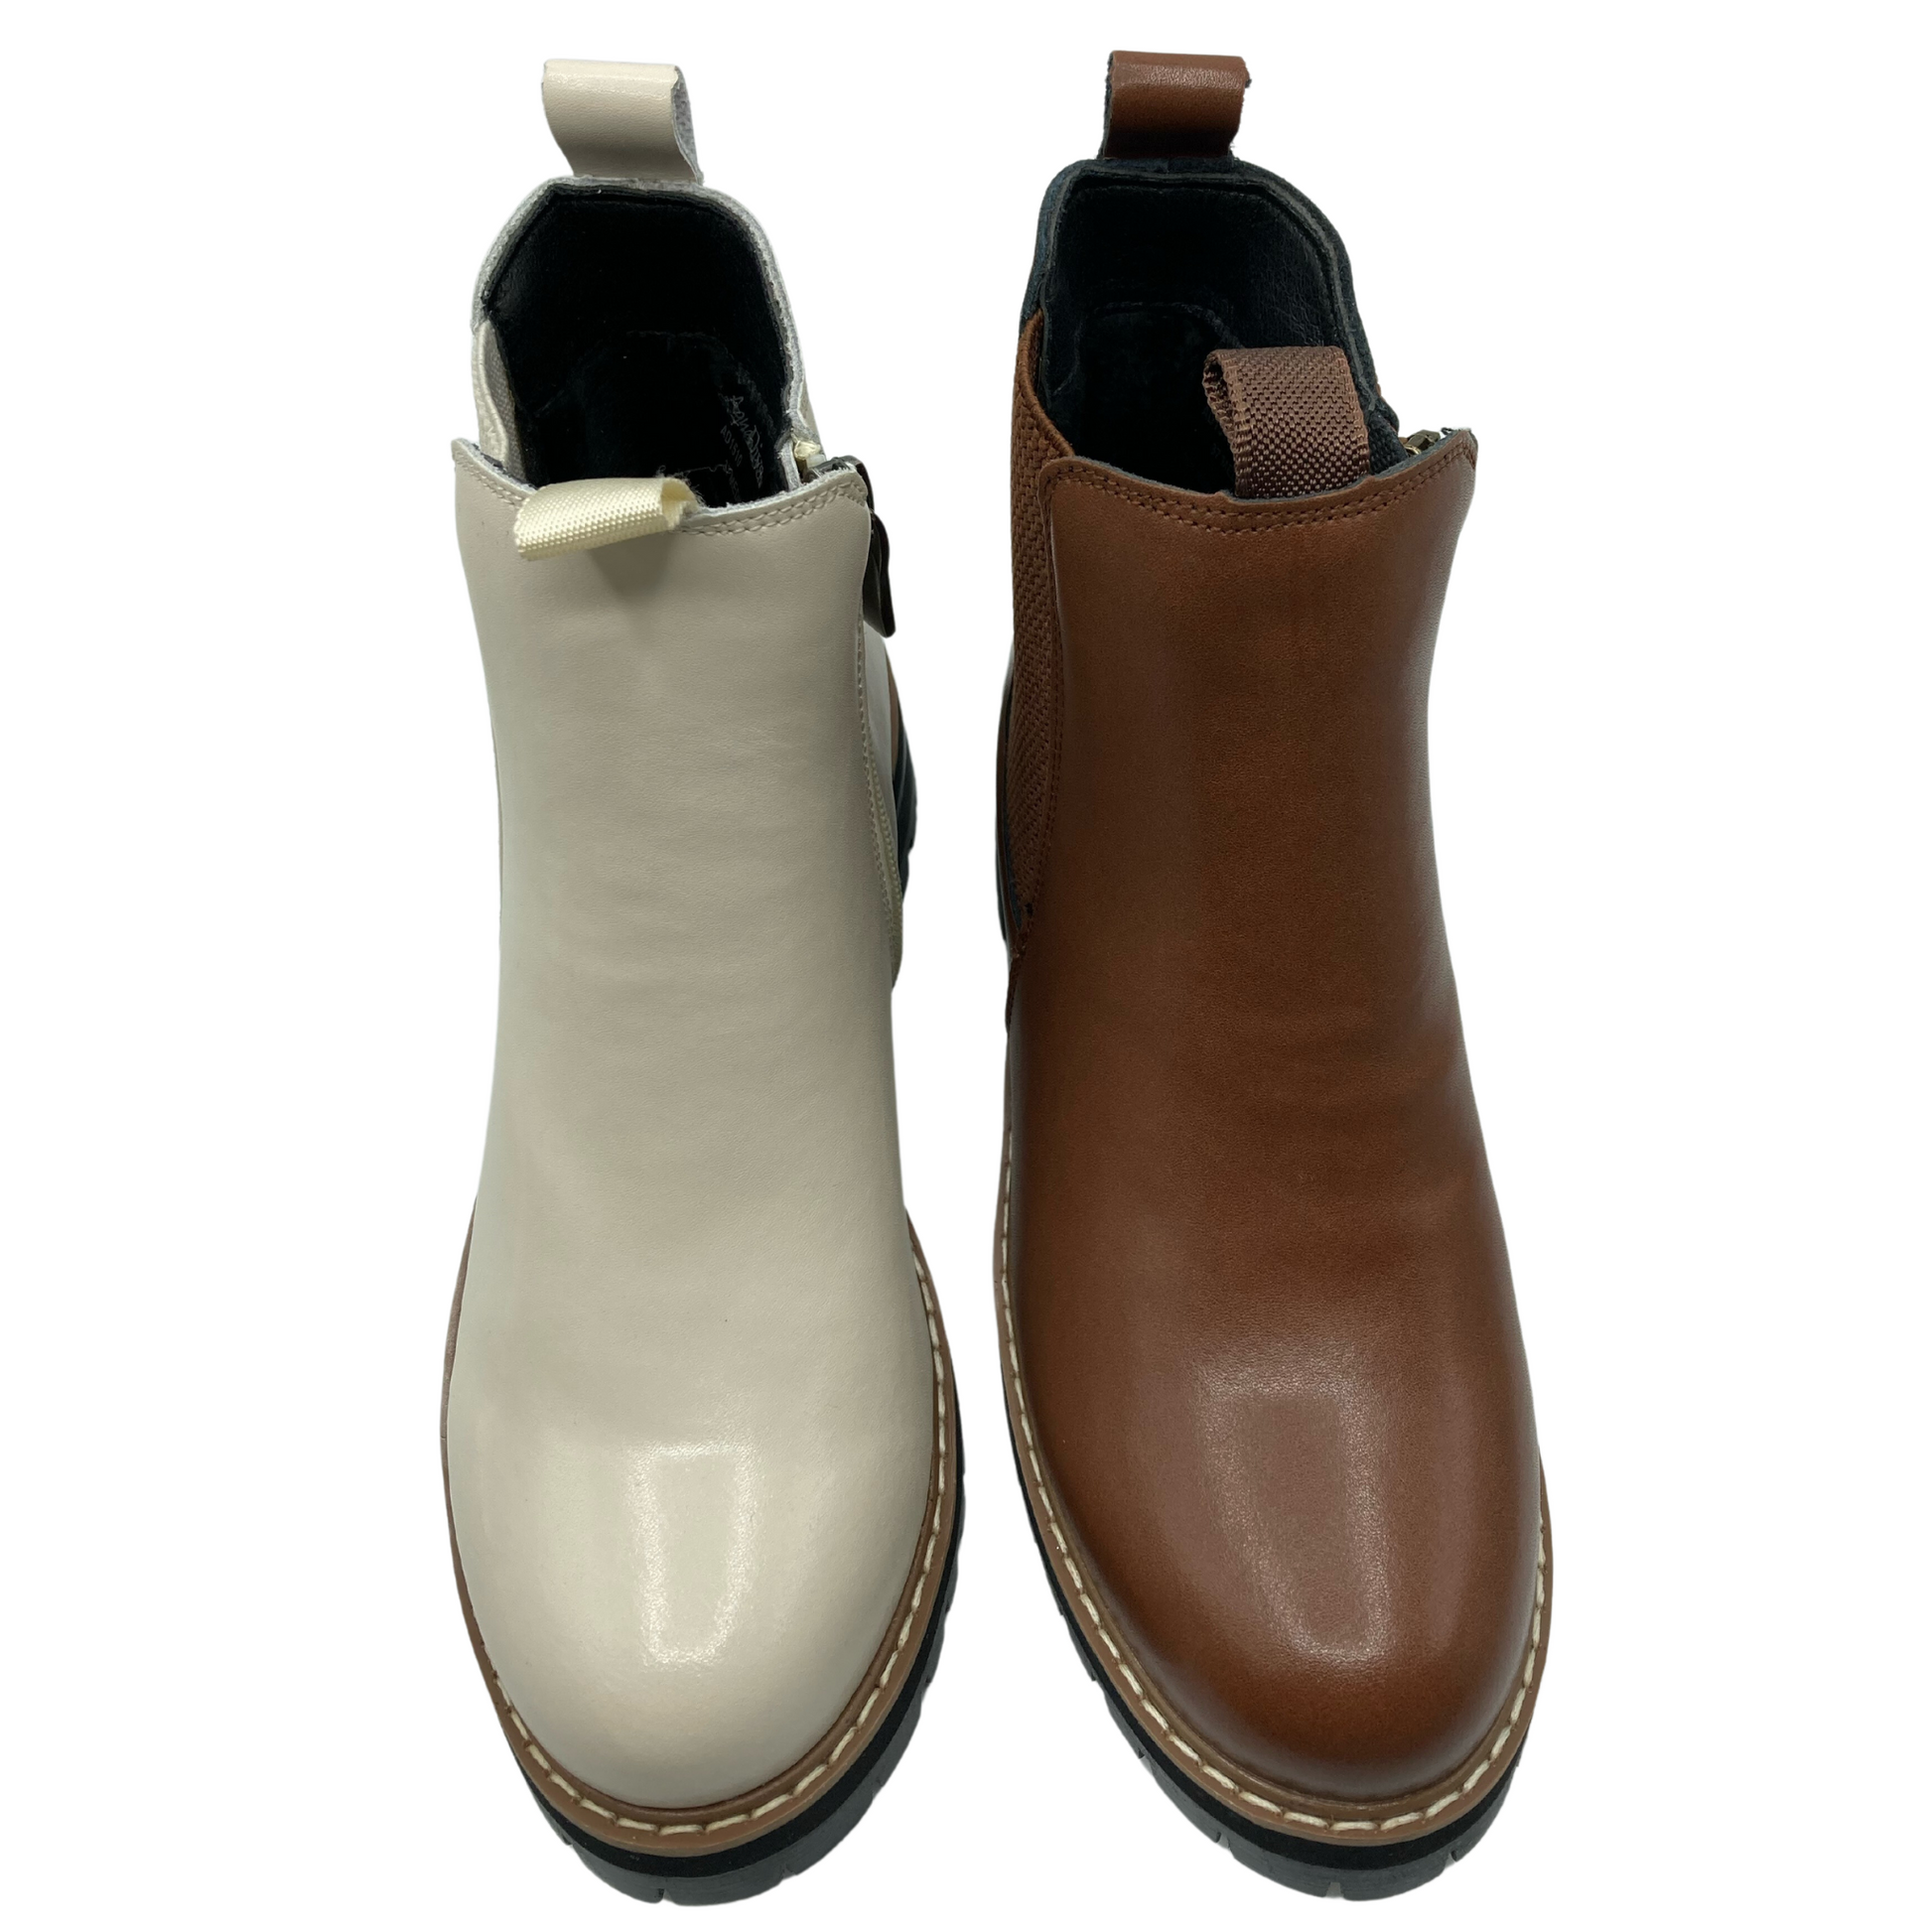 Top view of two ankle boots, the one on the left is beige and the one on the right is light brown. Both have double pull tabs on the upper shaft and rounded toes